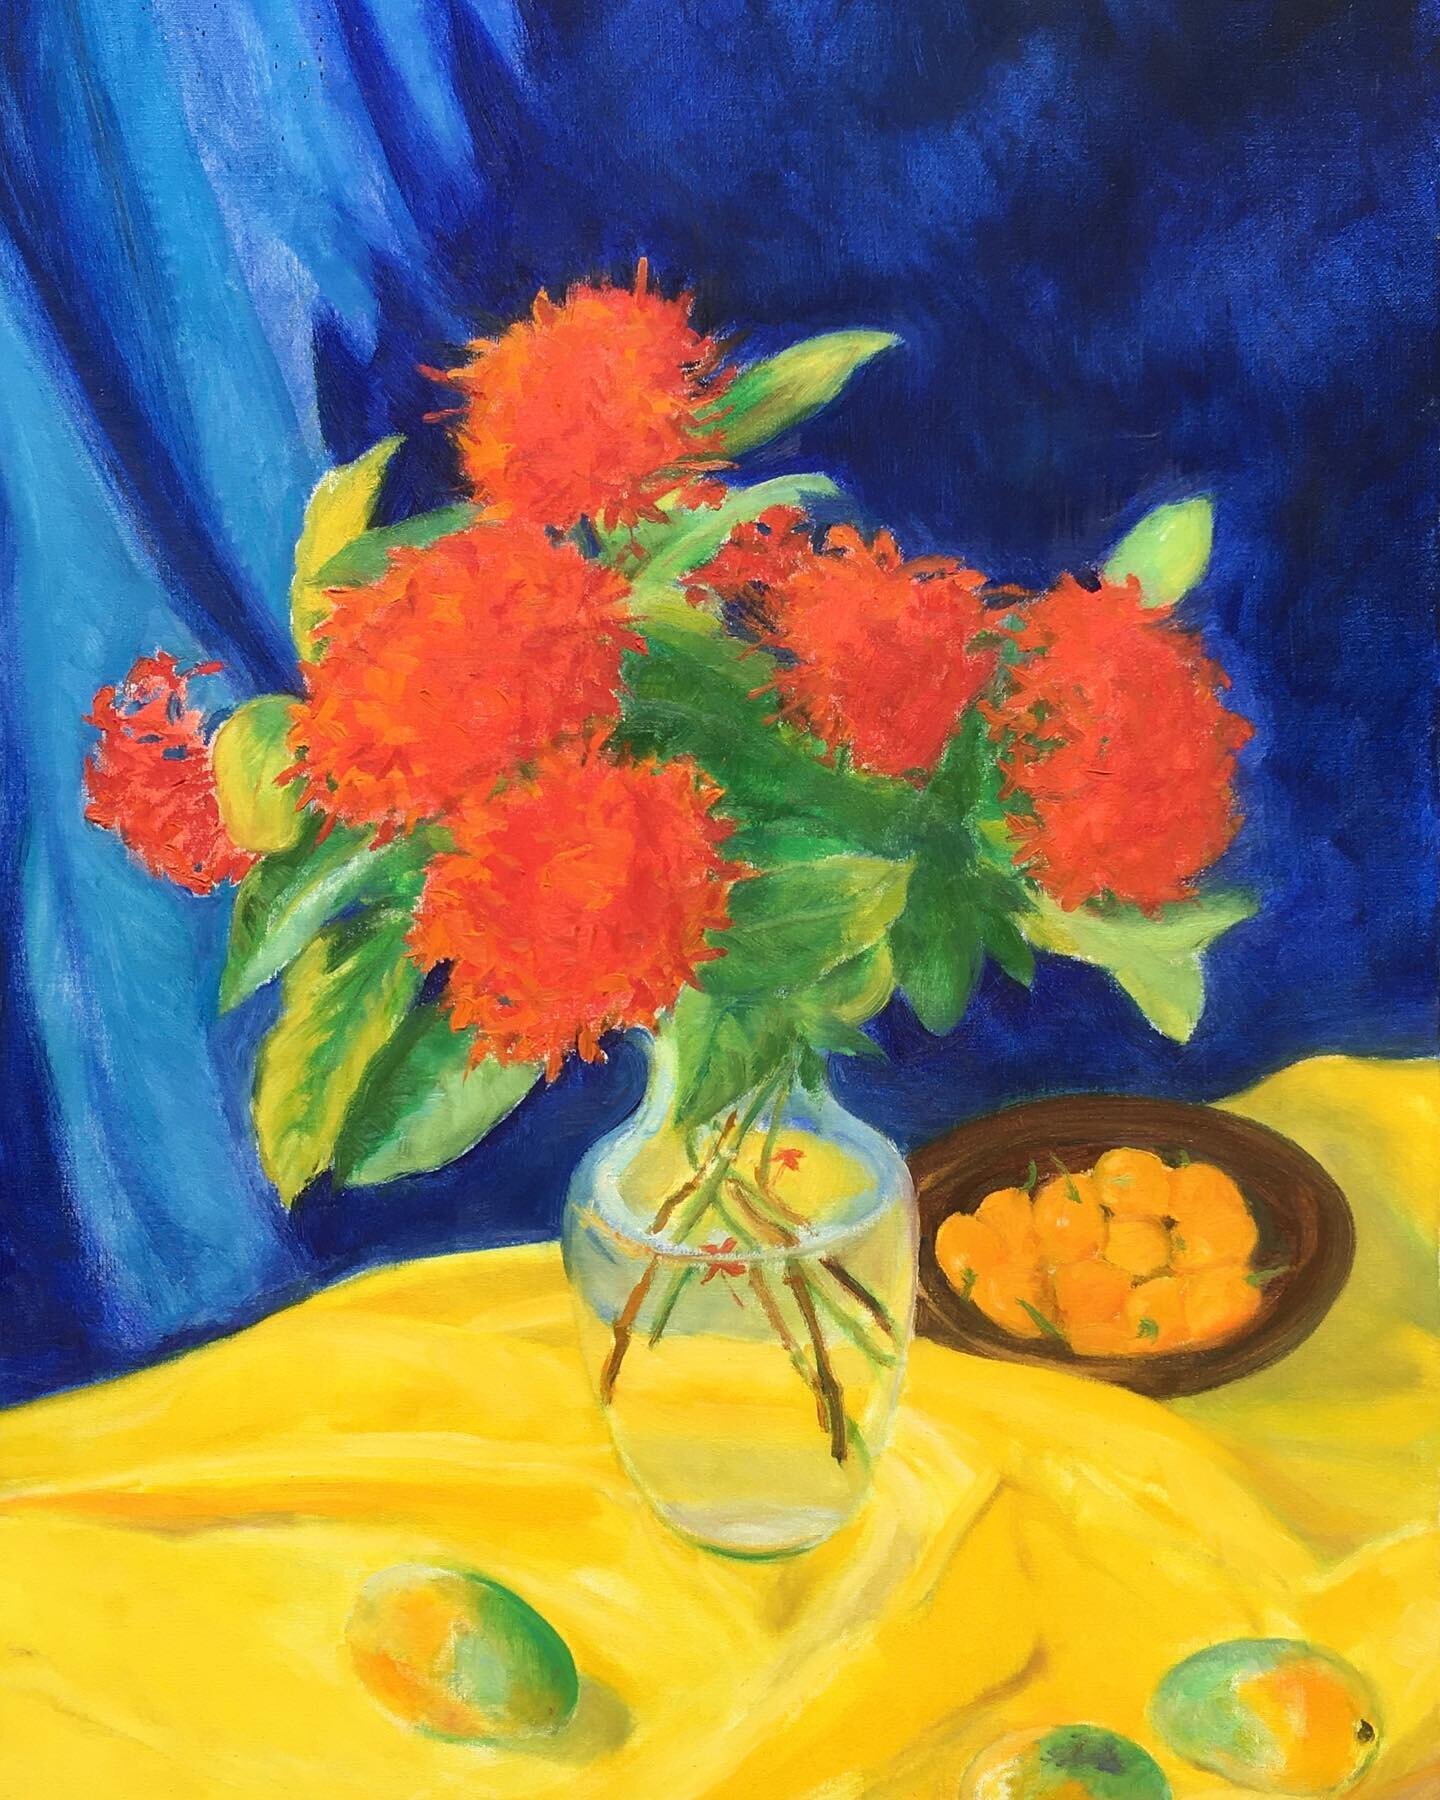 Ixora Bouquet in Primary with Mangoes and Kumquats by Sir Roland Richardson, Caribbean Impressionist, painting beauty from life, www.rolandrichardson.com. #rolandrichardsonartgallery #caribbean #caribbeanart #pleinairpainting #stilllife #exotic #stma